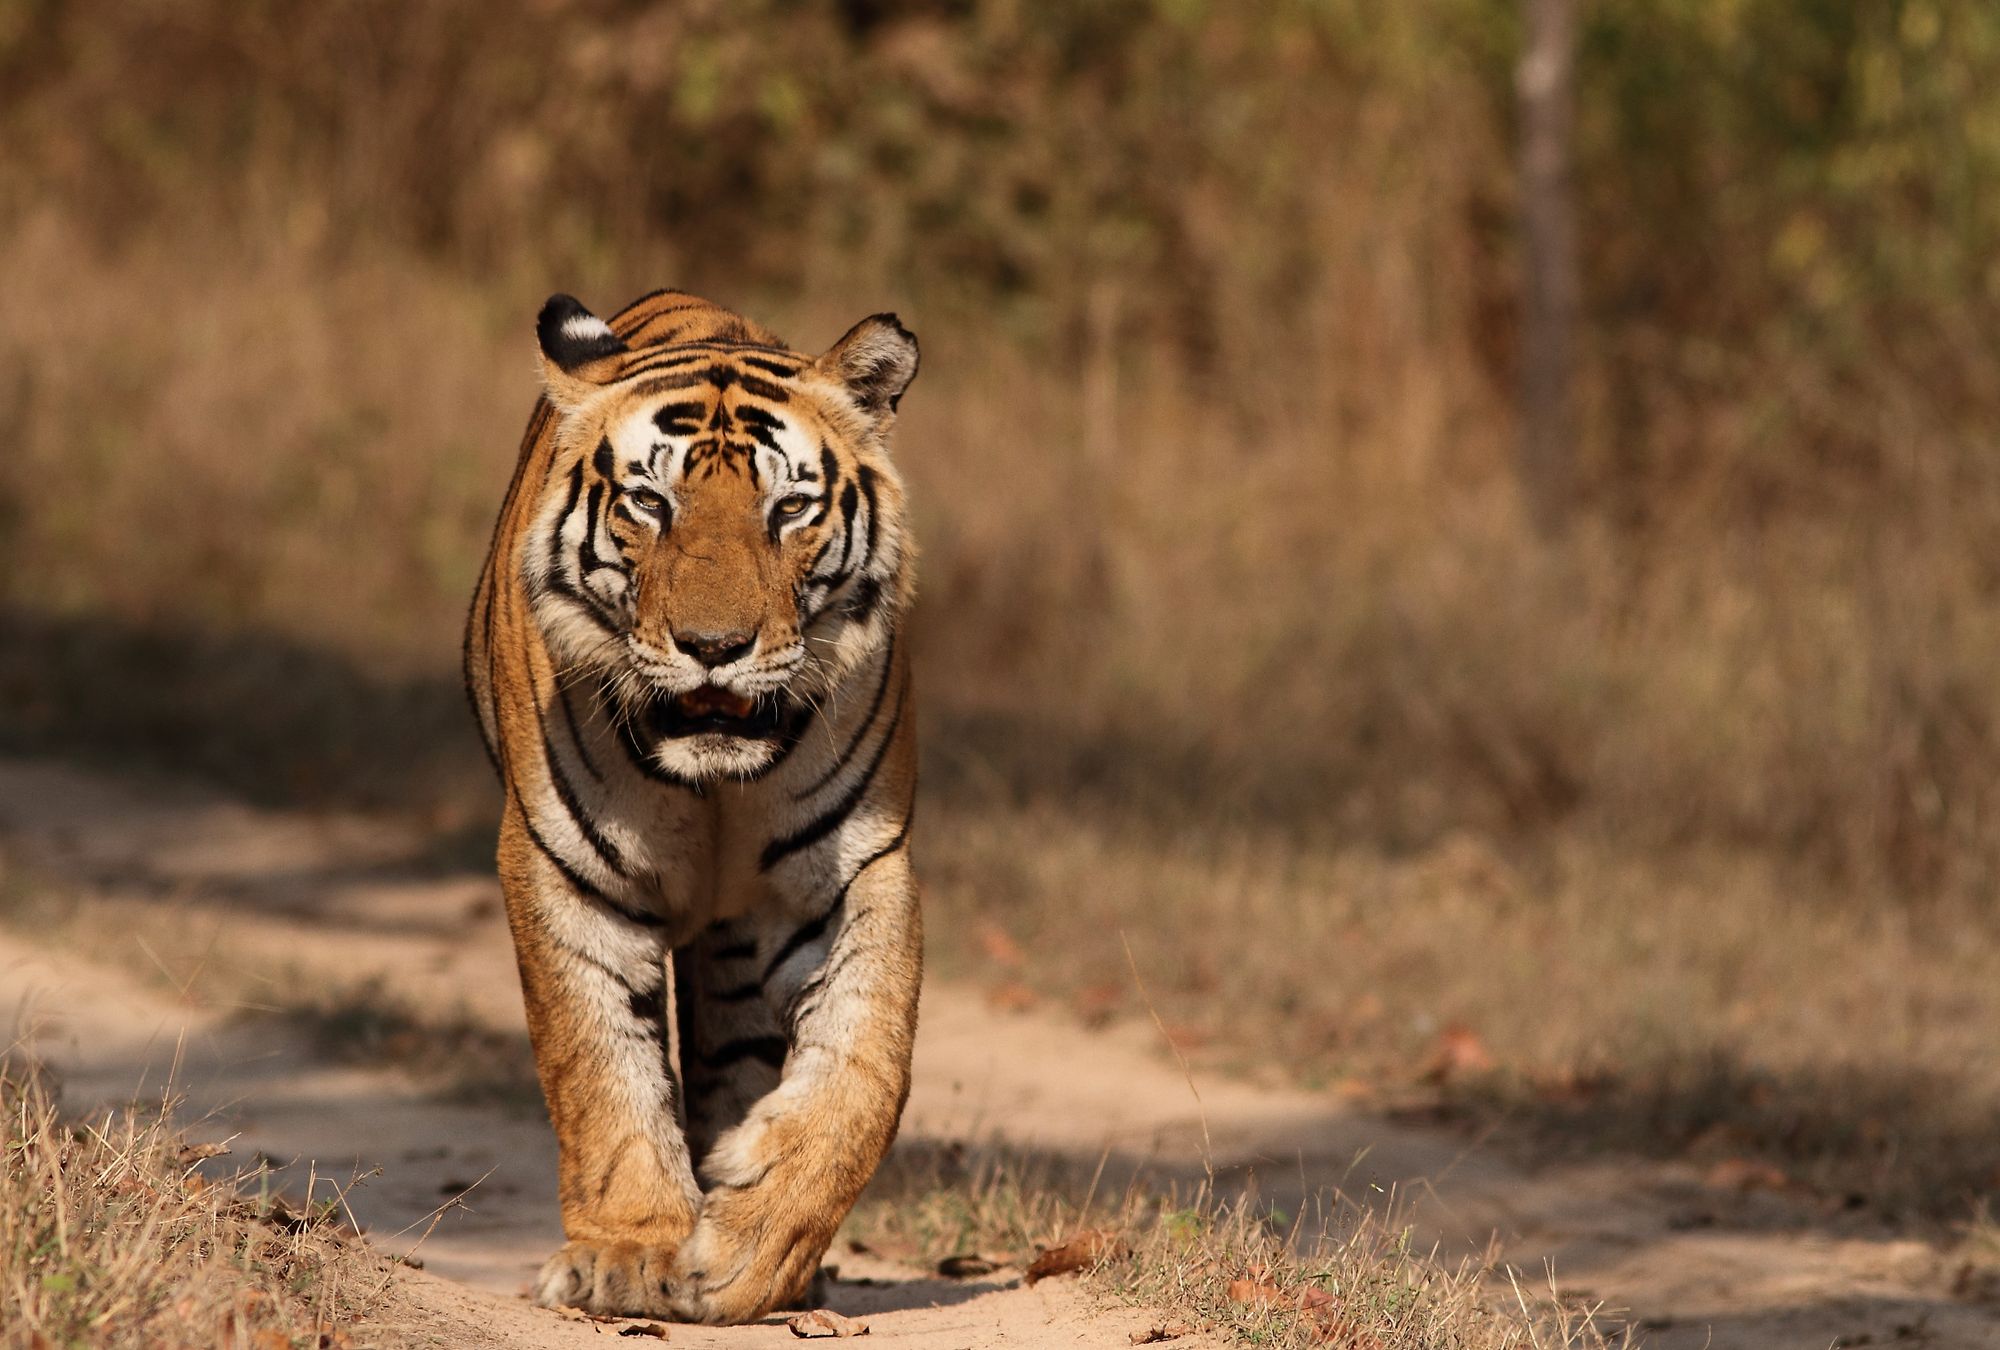 Dominant Male Tiger Munna from Kanha National Park By Anuradha Marwah | www.shutterstock.com